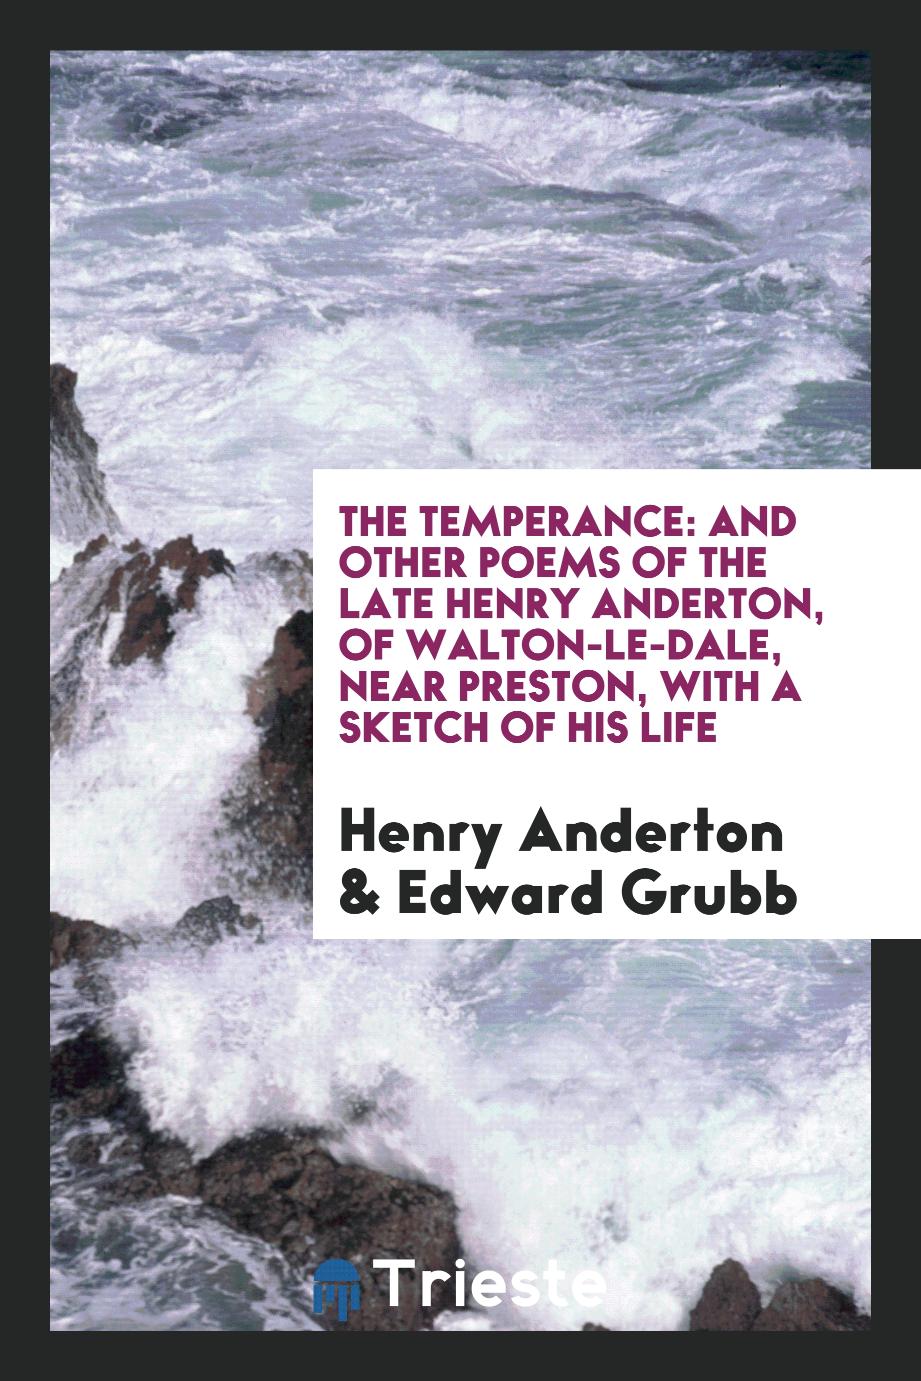 The Temperance: And Other Poems of the Late Henry Anderton, of Walton-Le-Dale, near Preston, with a Sketch of His Life